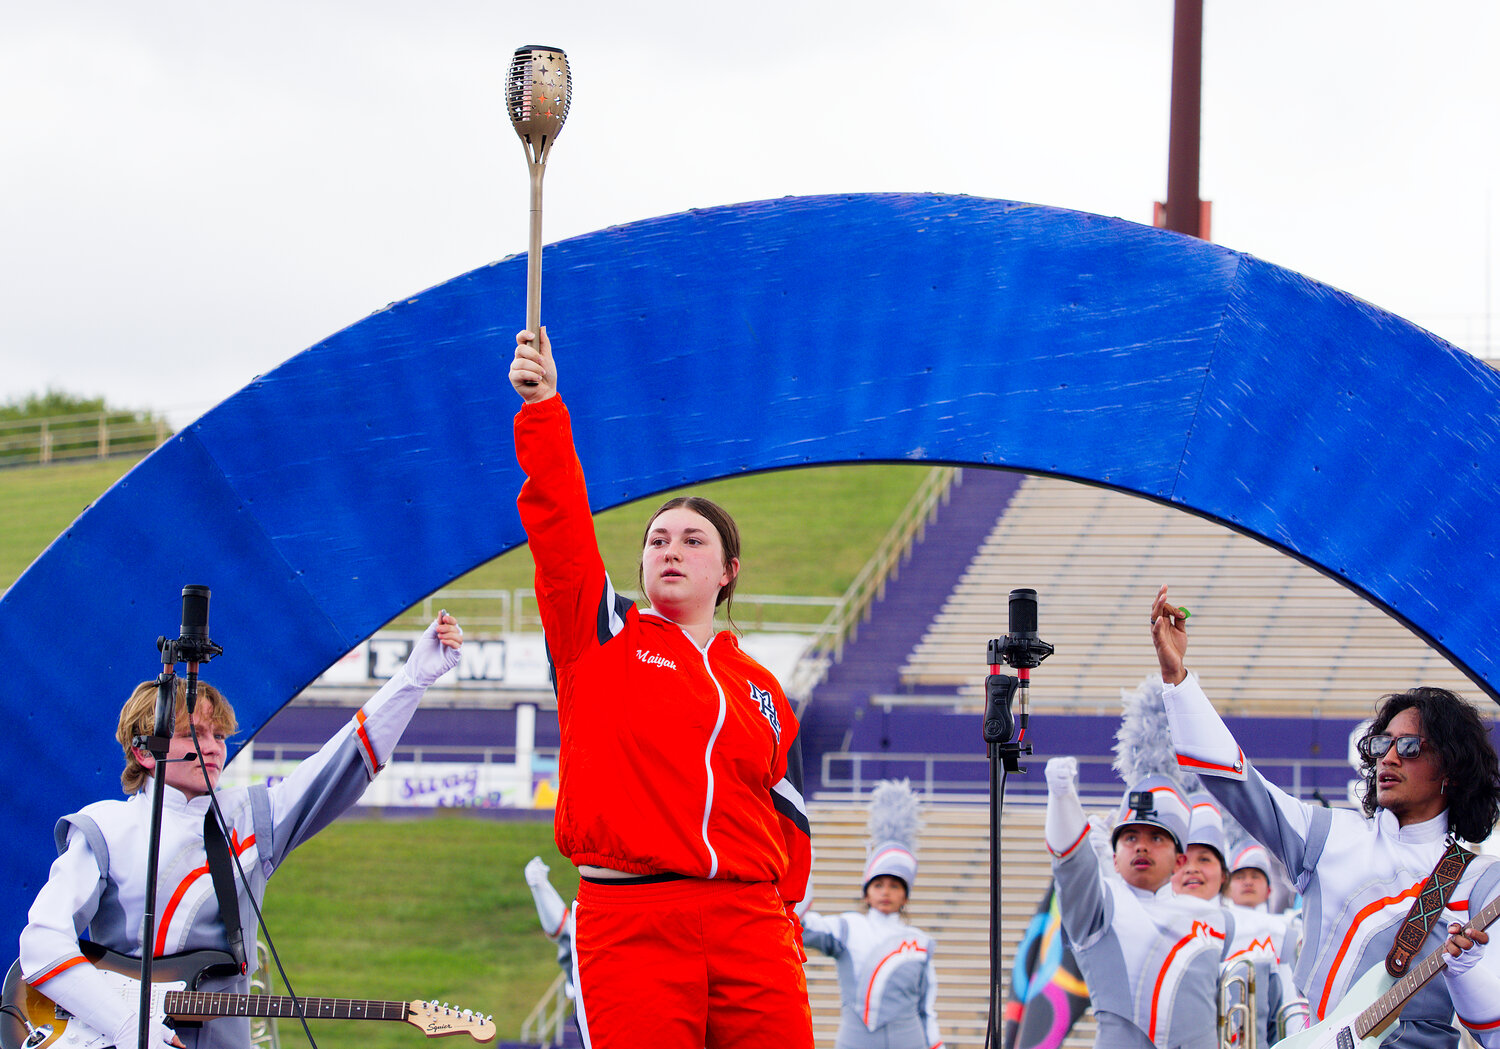 The Olympic torch is raised to conclude Mineola’s performance at the area marching contest. [see additional area shots]